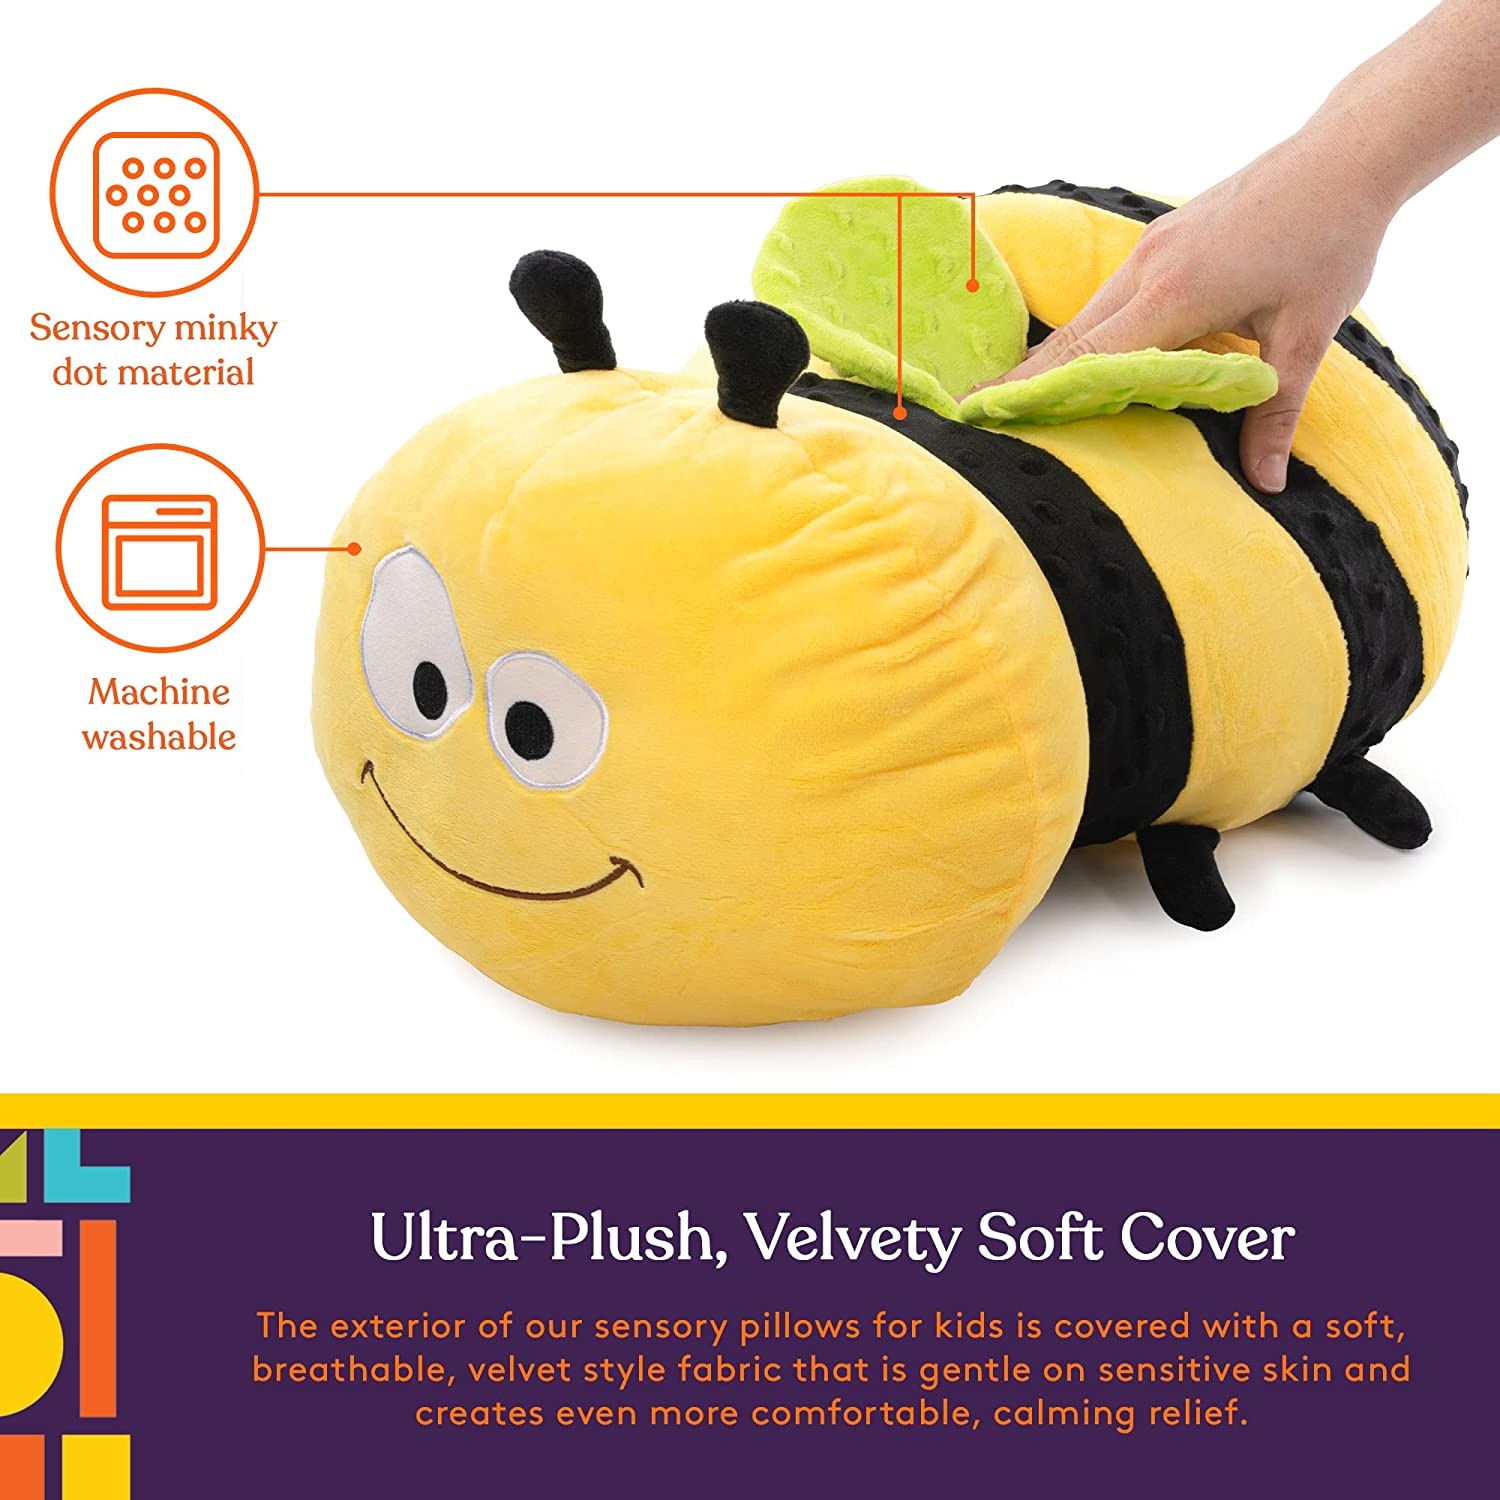 Special Supplies Bumble Bee Sensory Vibrating Pillow, Pressure Activated  for Kids and Adults, Plush Minky Soft with Textured Therapy Stimulation  Bumps